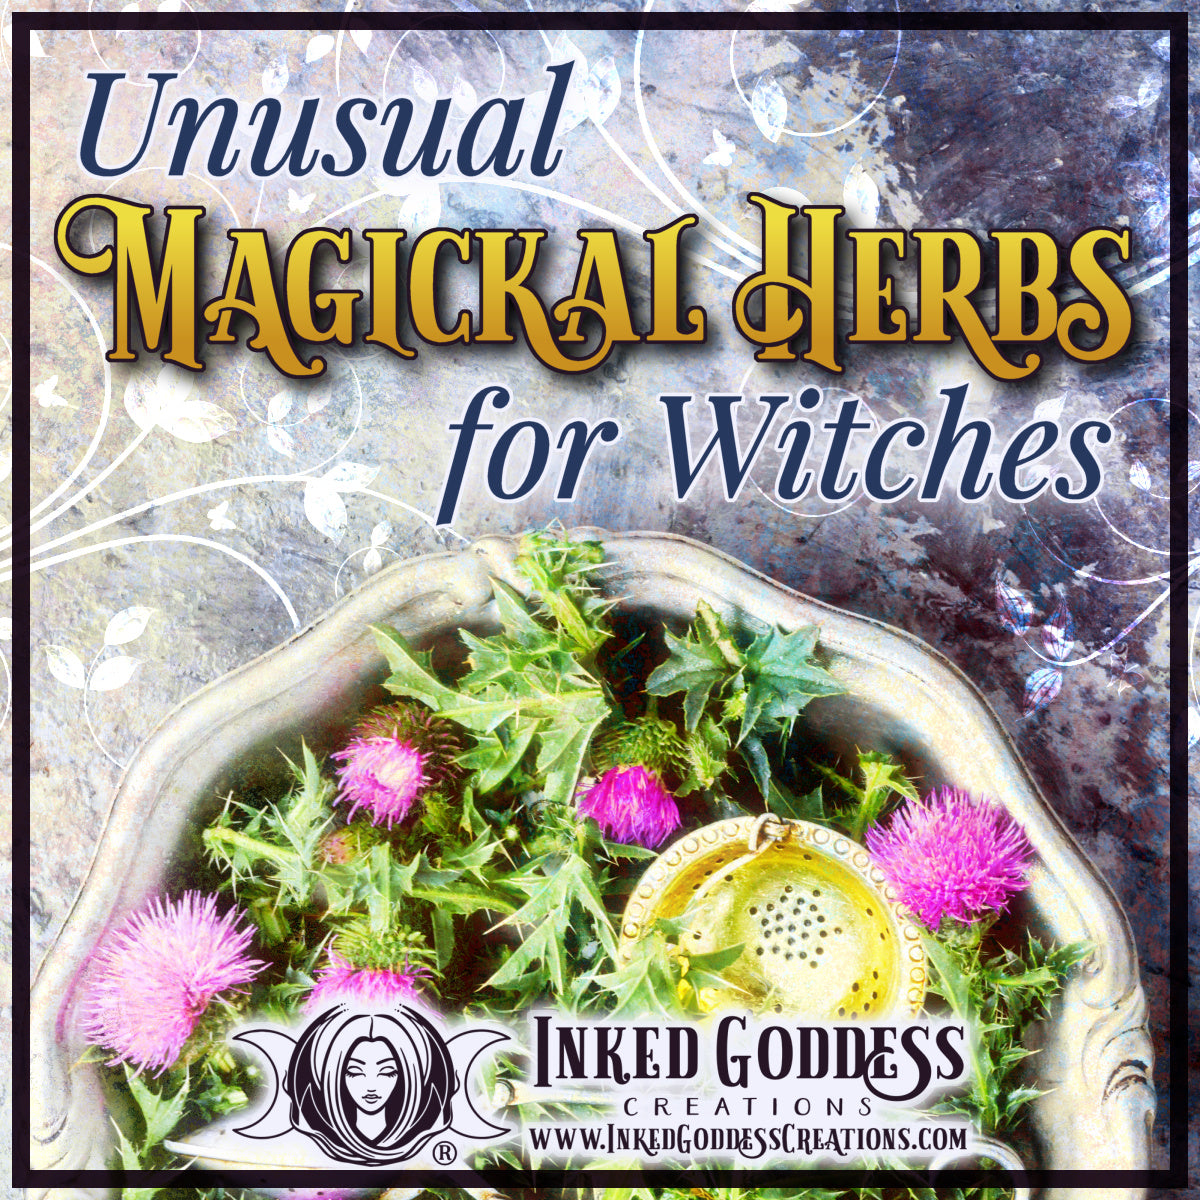 Uncommon Magickal Herbs for Witches